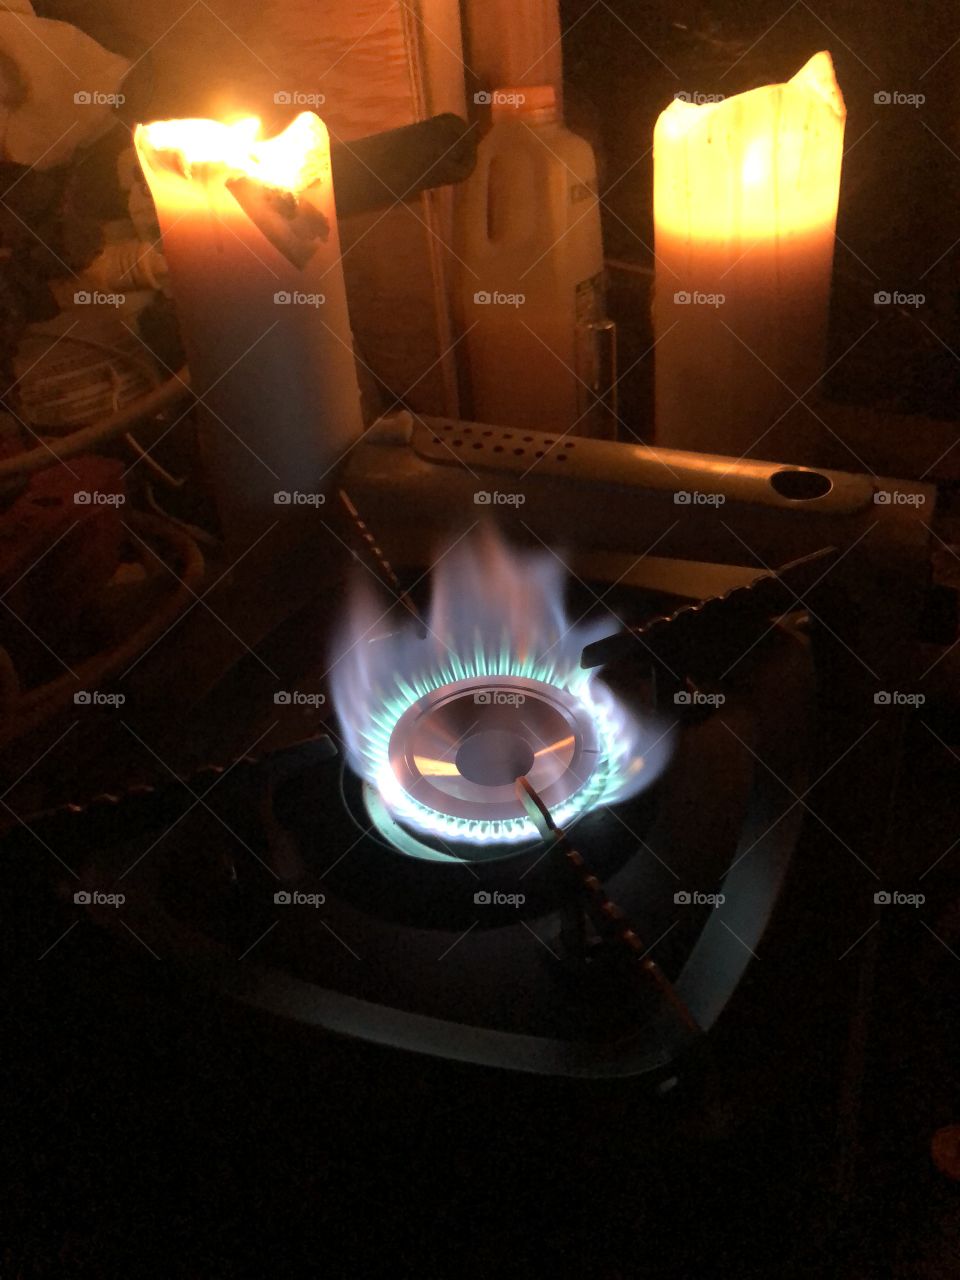 A different perspective of the flame on the stove 